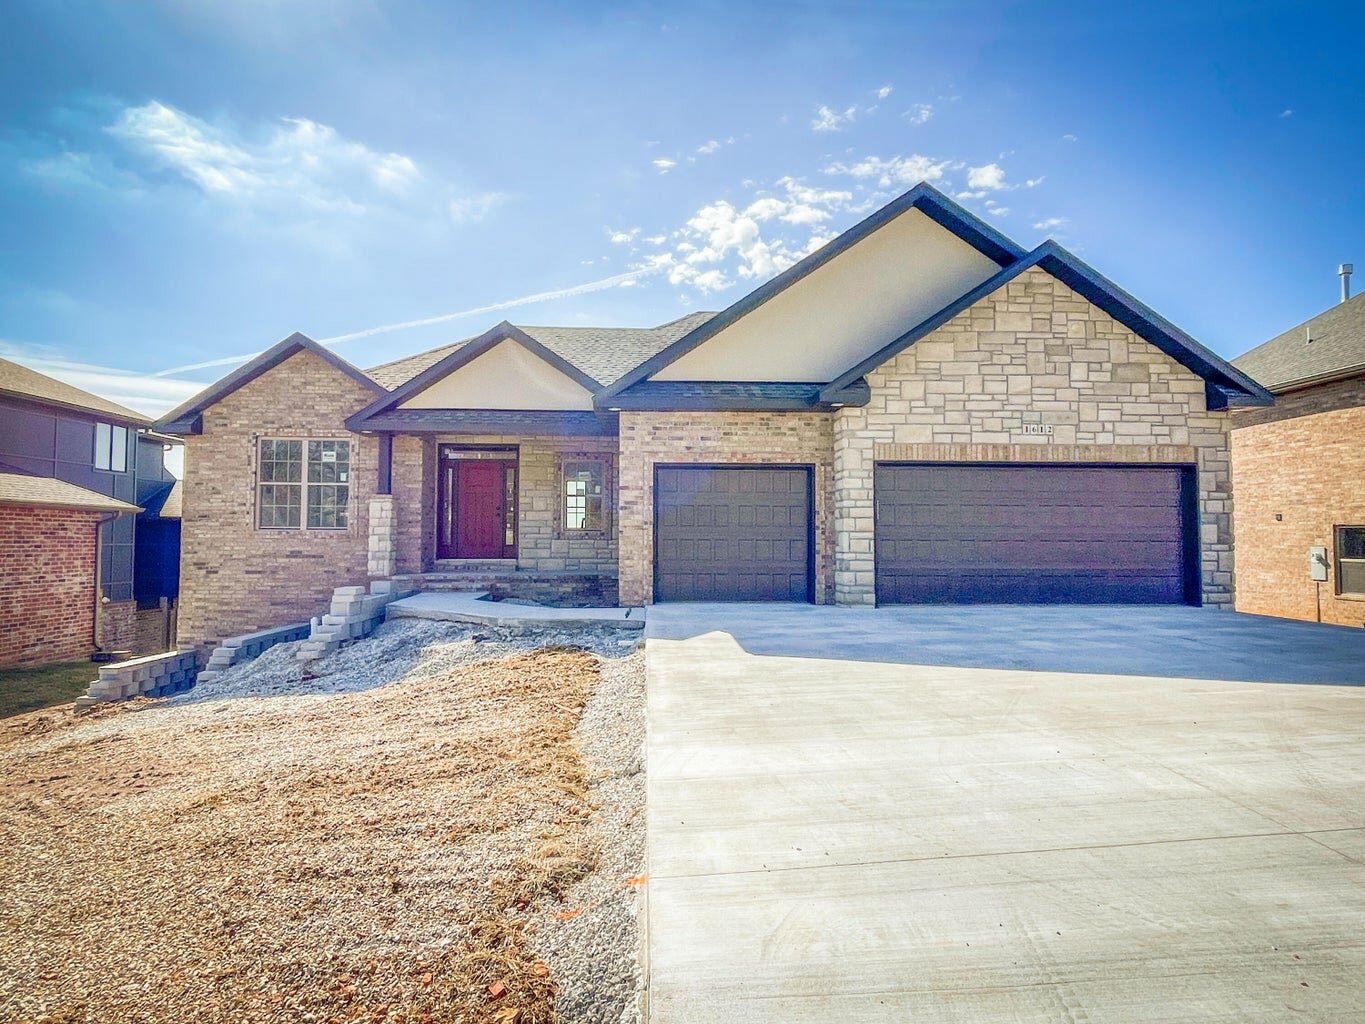 1672 W. Silver Oak Drive
$674,900
Bedrooms: 5
Bathrooms: 4
Listing firm: Old World Realty LLC